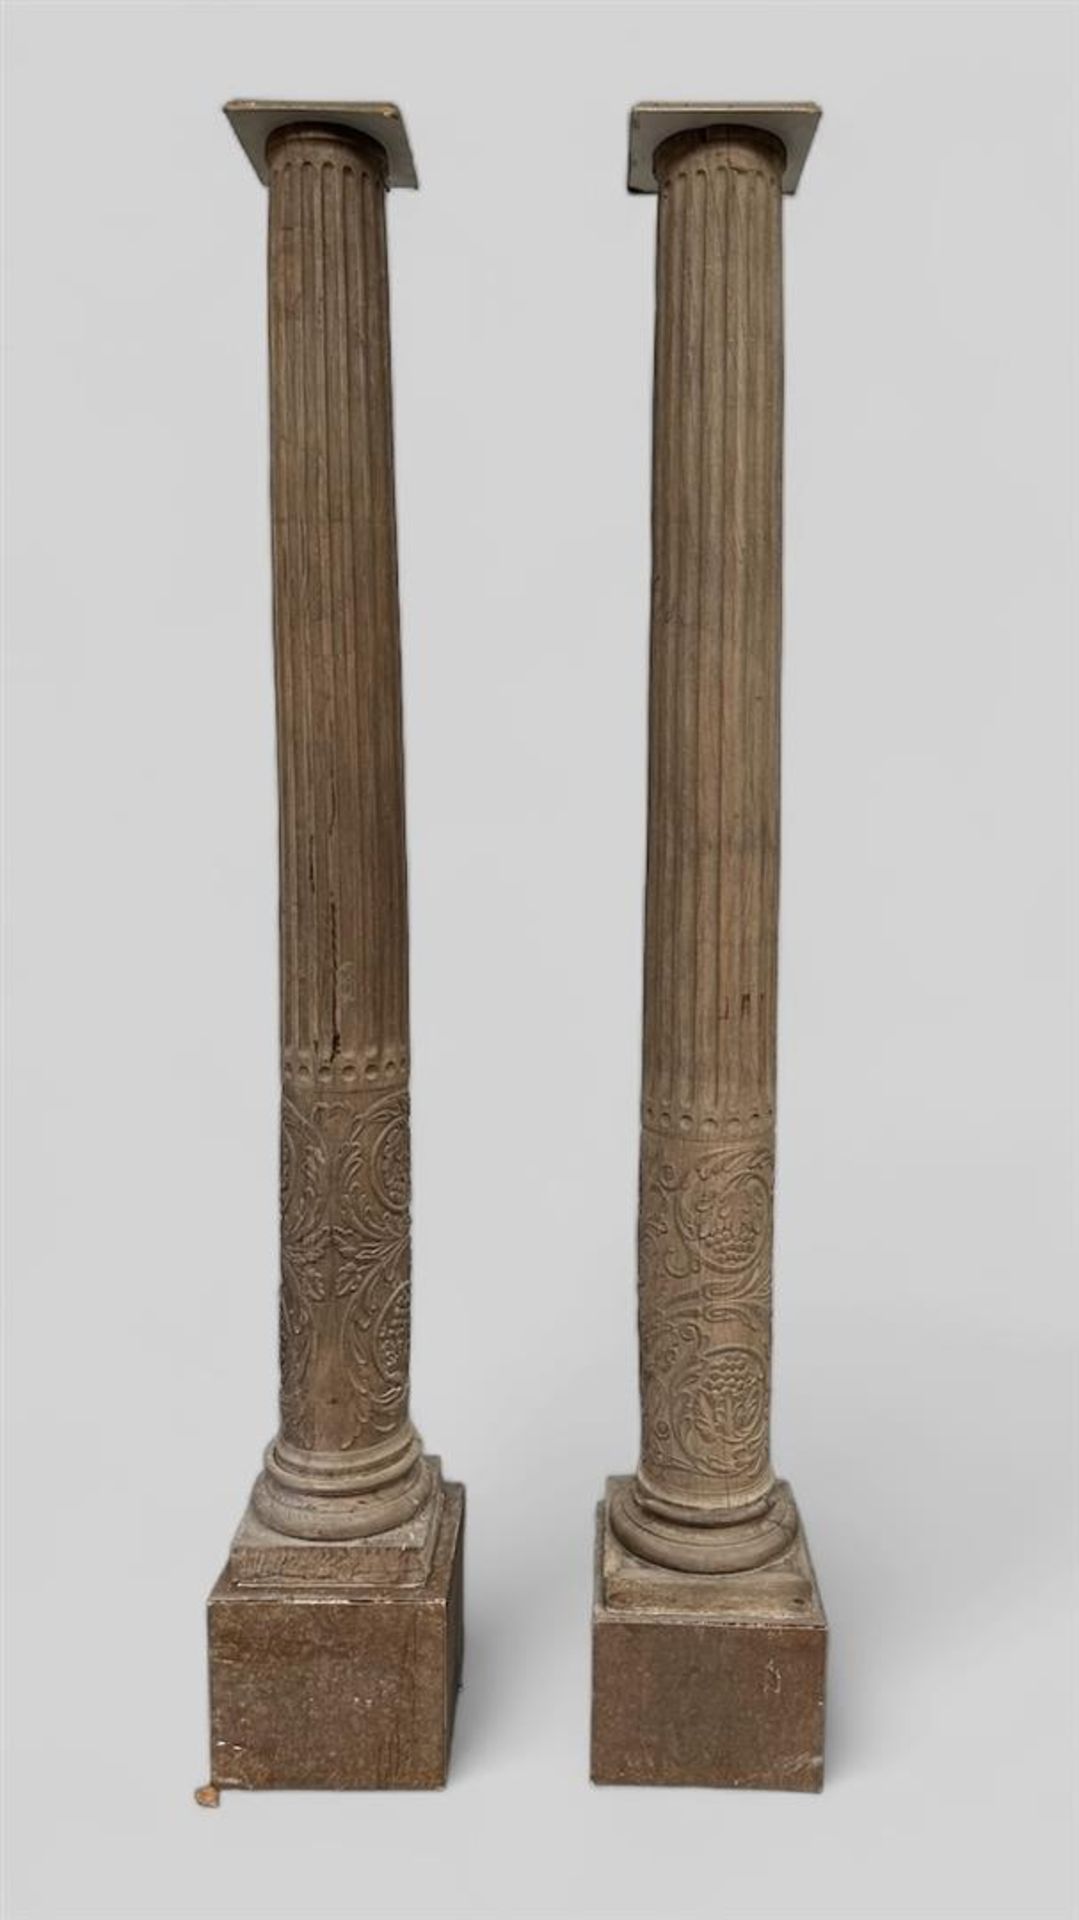 A pair of French oak fluted columns with carved decoration of vines. ca. 1800.
H.: 320 cm.